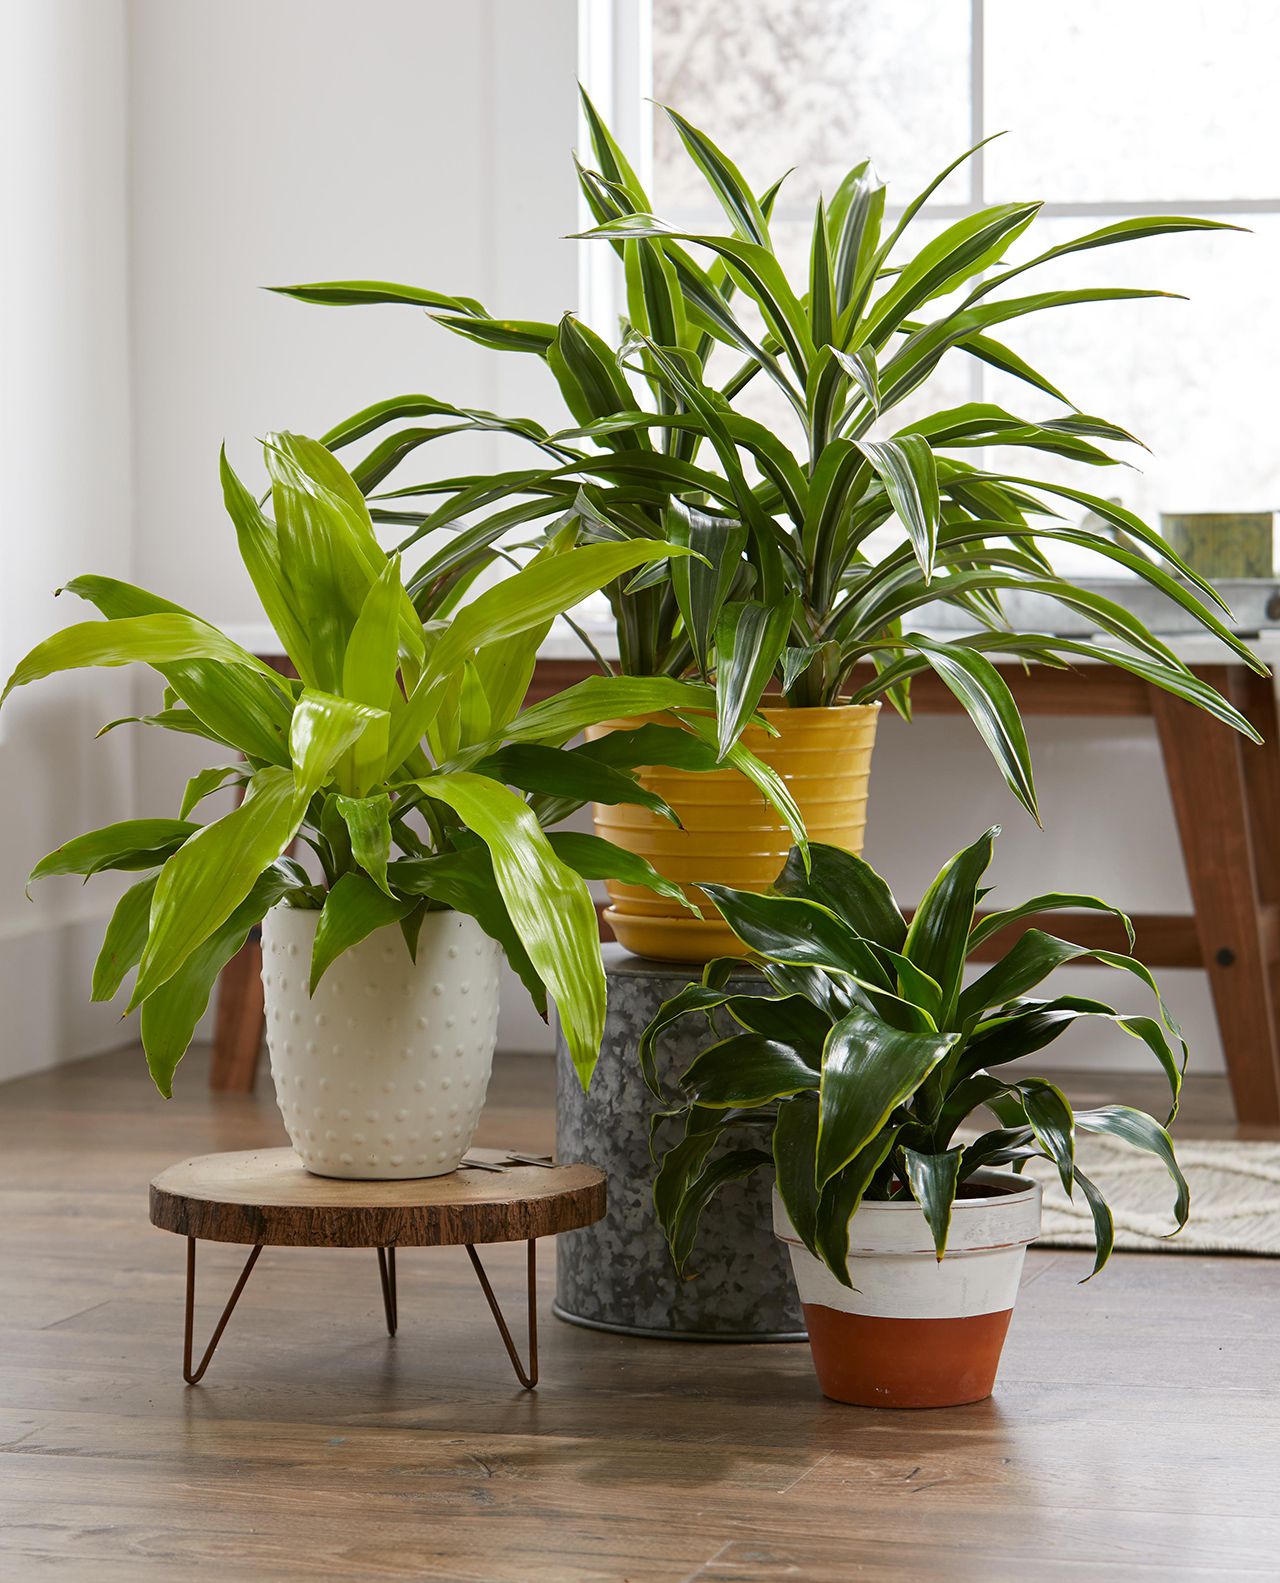 The Beauty of Green Leafy Indoor Plants: Enhancing Your Home with Nature's Elegance